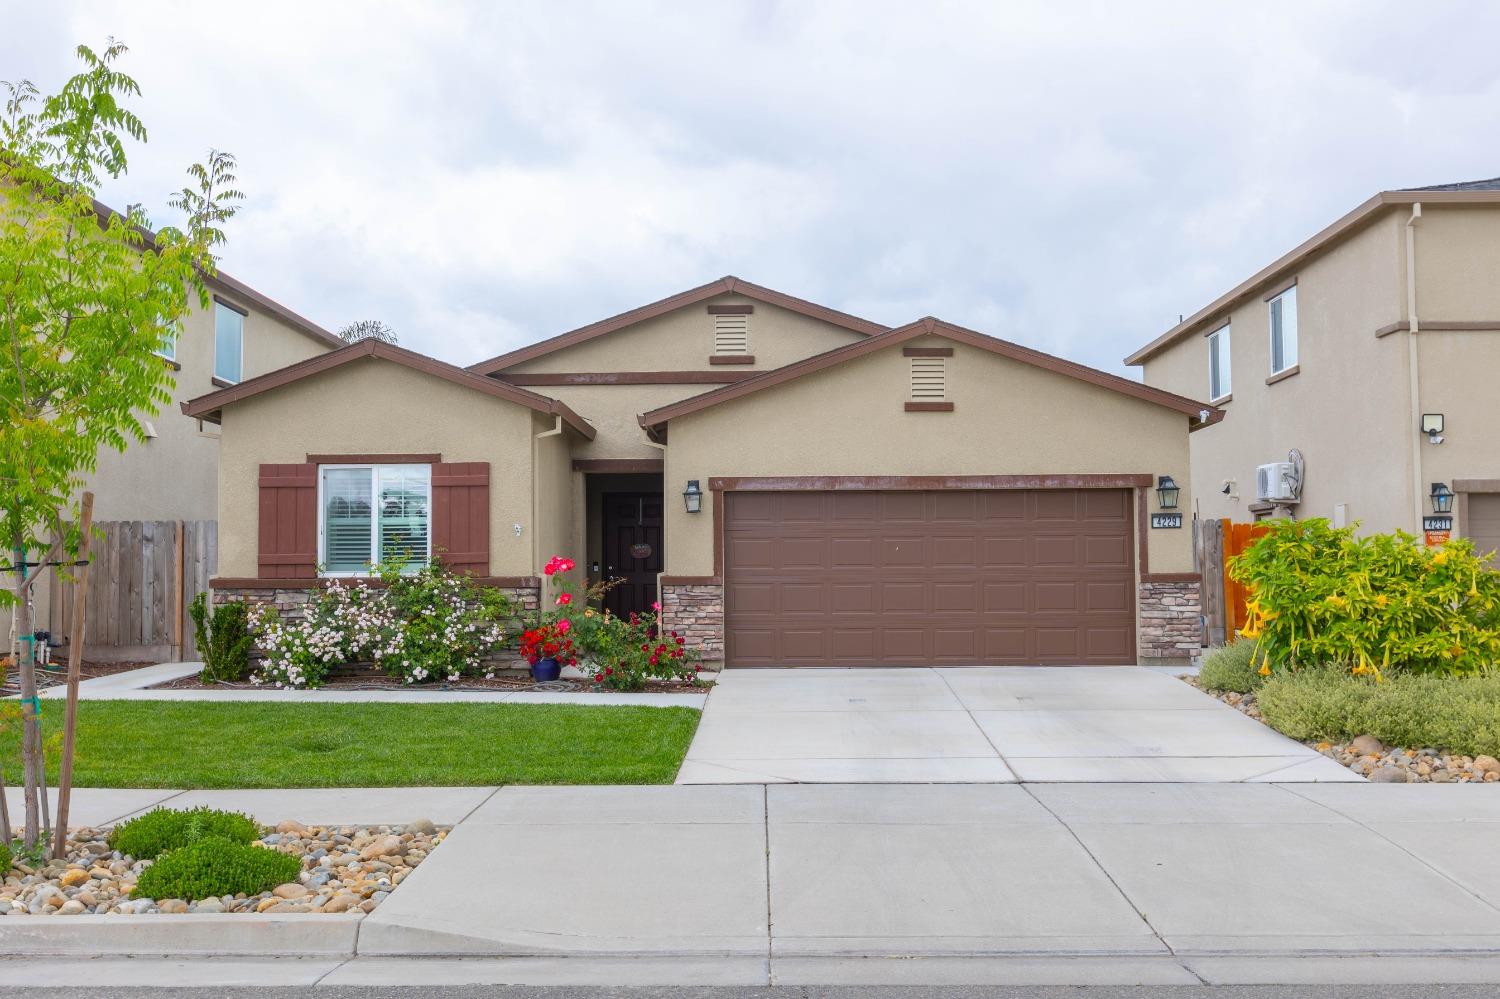 Photo of 4229 Lasalle Dr in Merced, CA